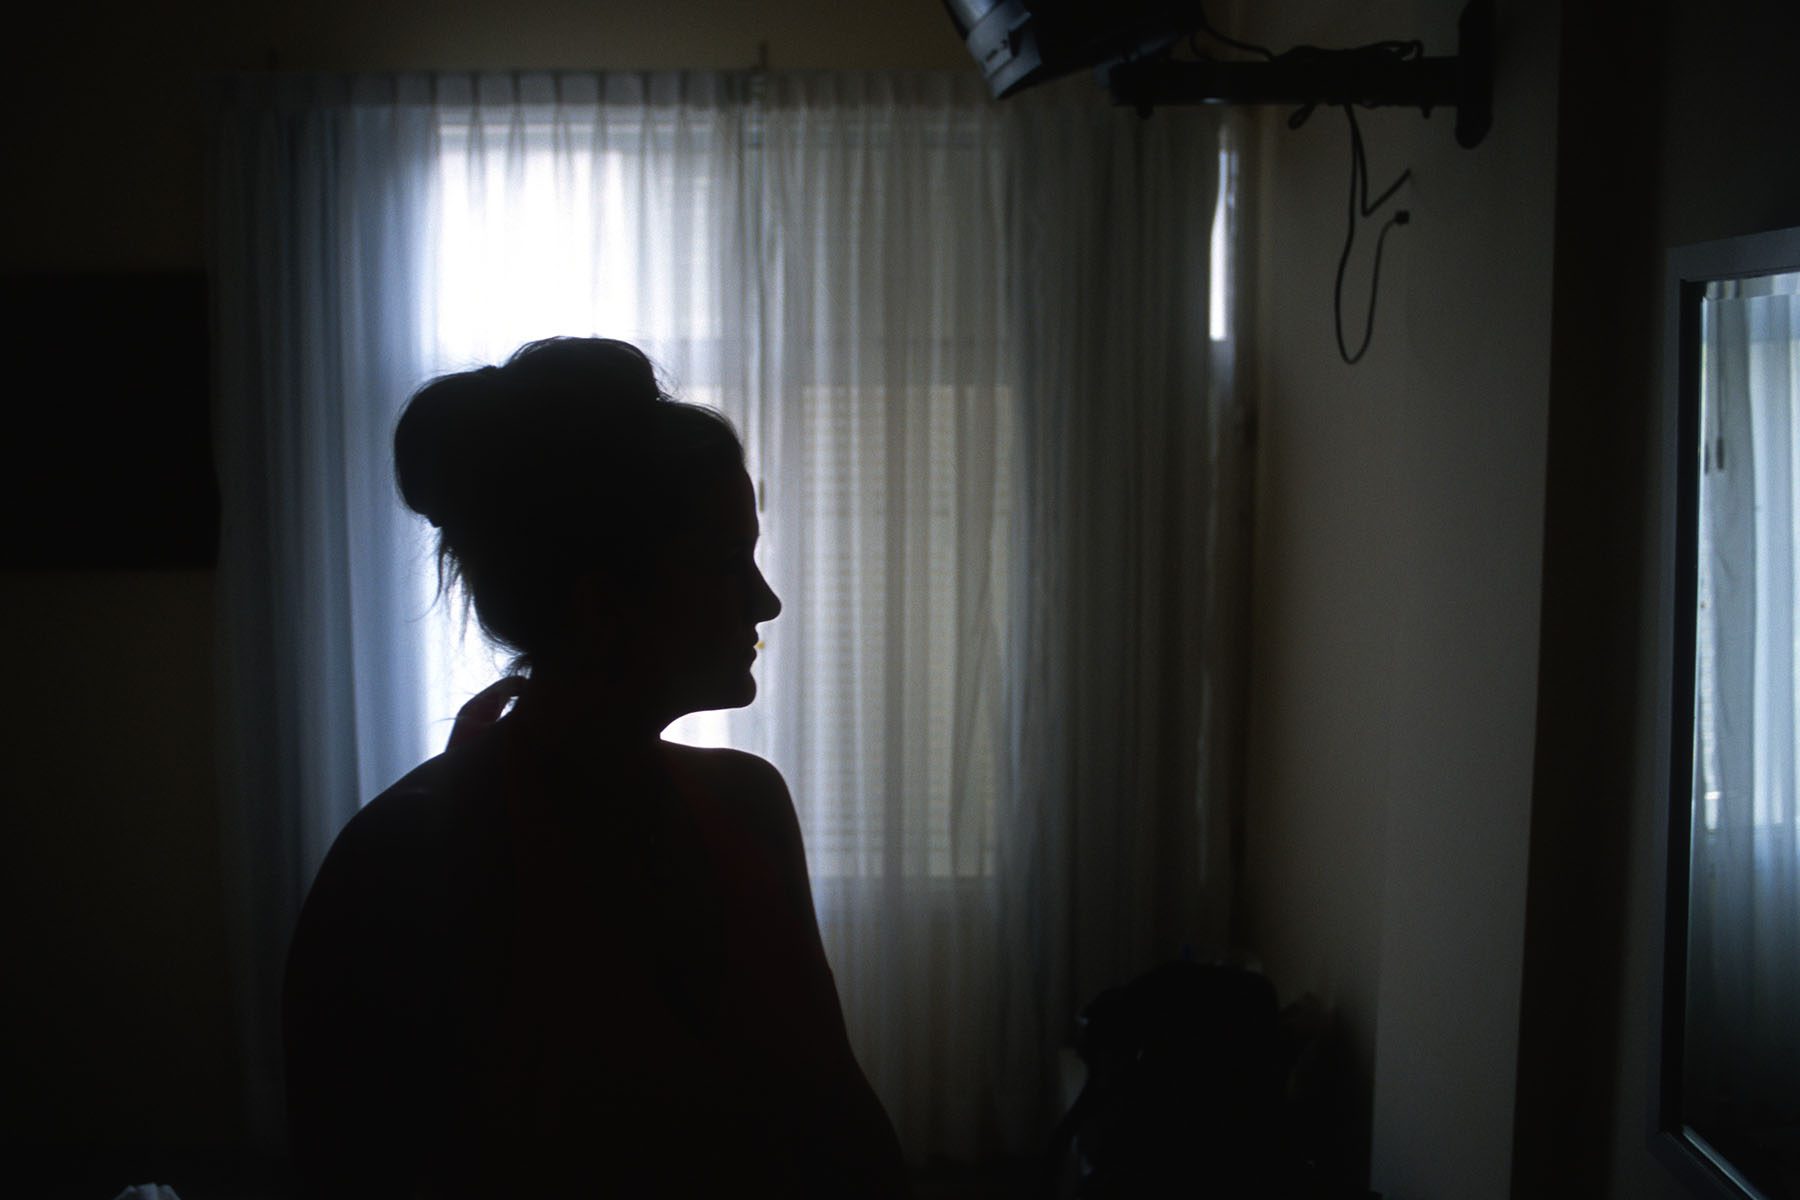 Silhouette of a woman in a room near the window.